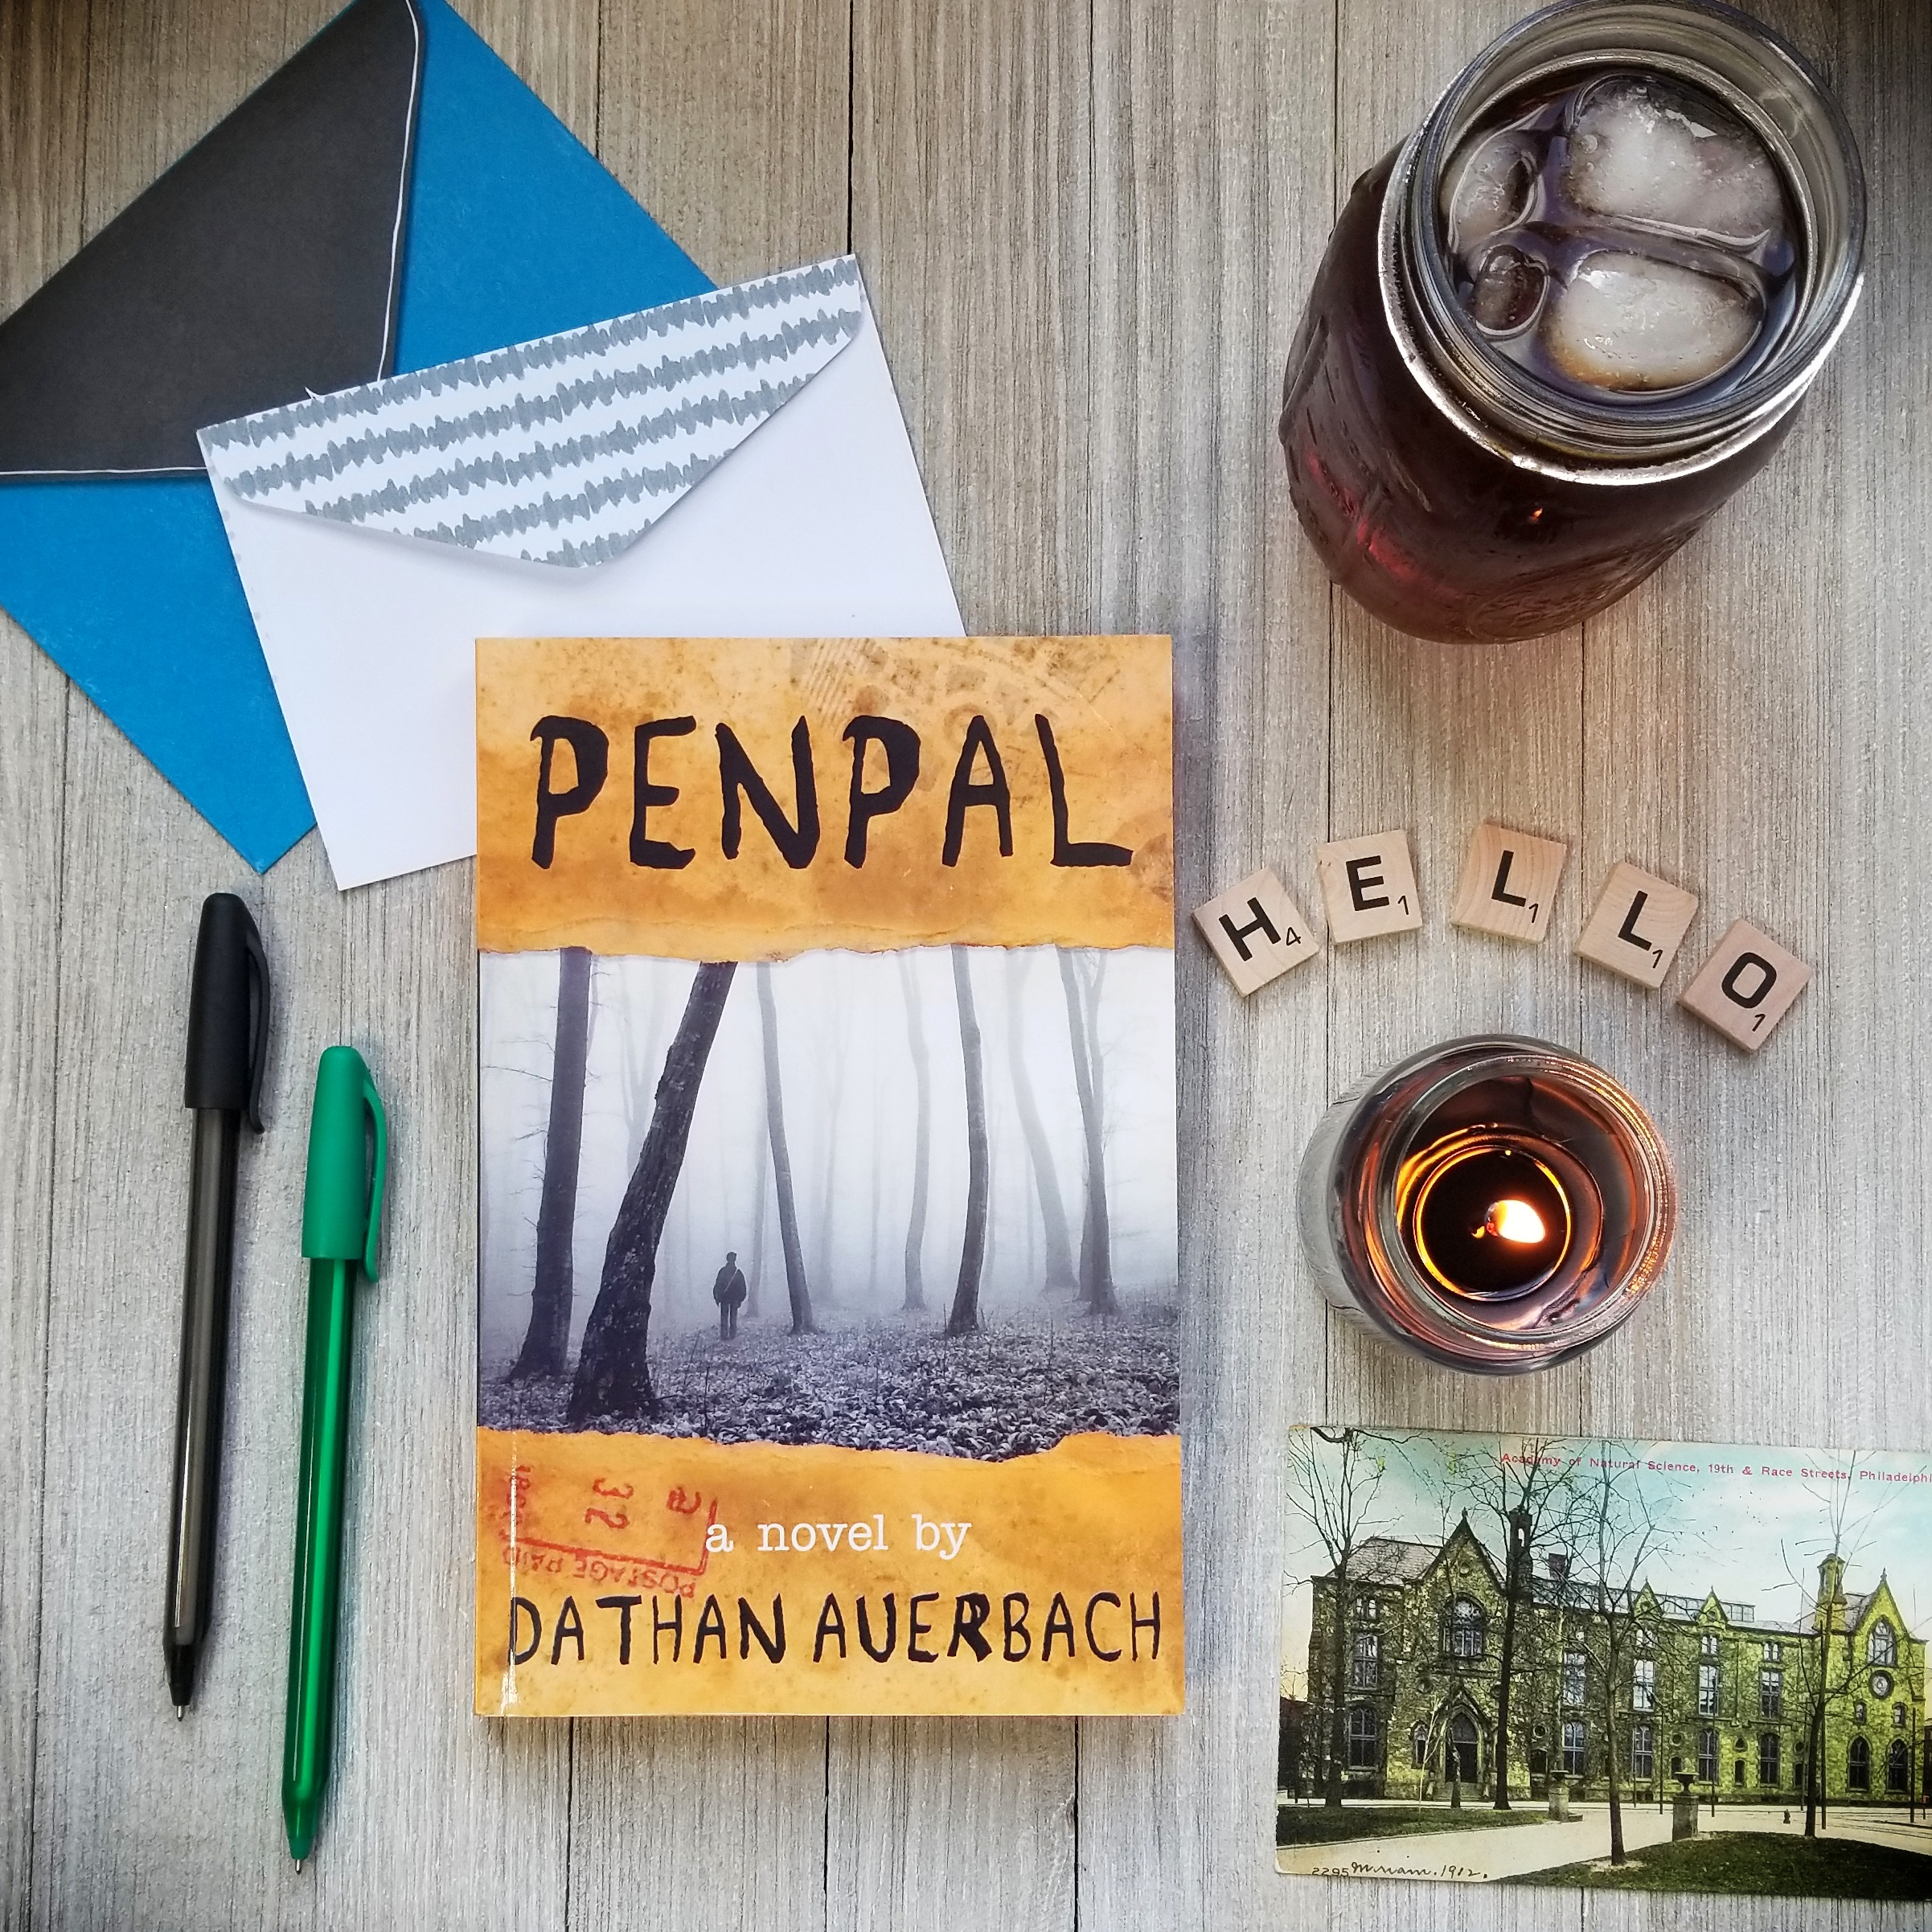 The journey from NoSleep to novel: a discussion of Penpal by Dathan Auerbac...